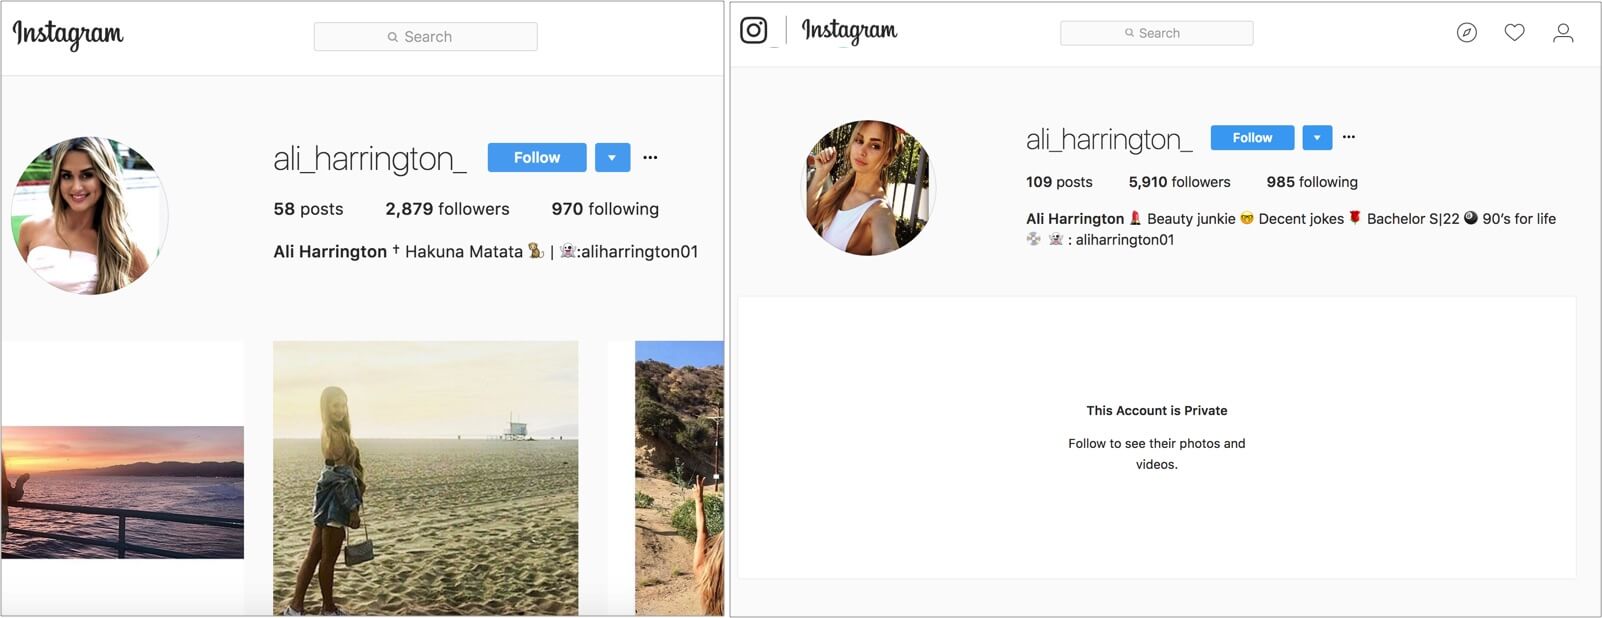 Ali Instagram Followers from The Bachelor